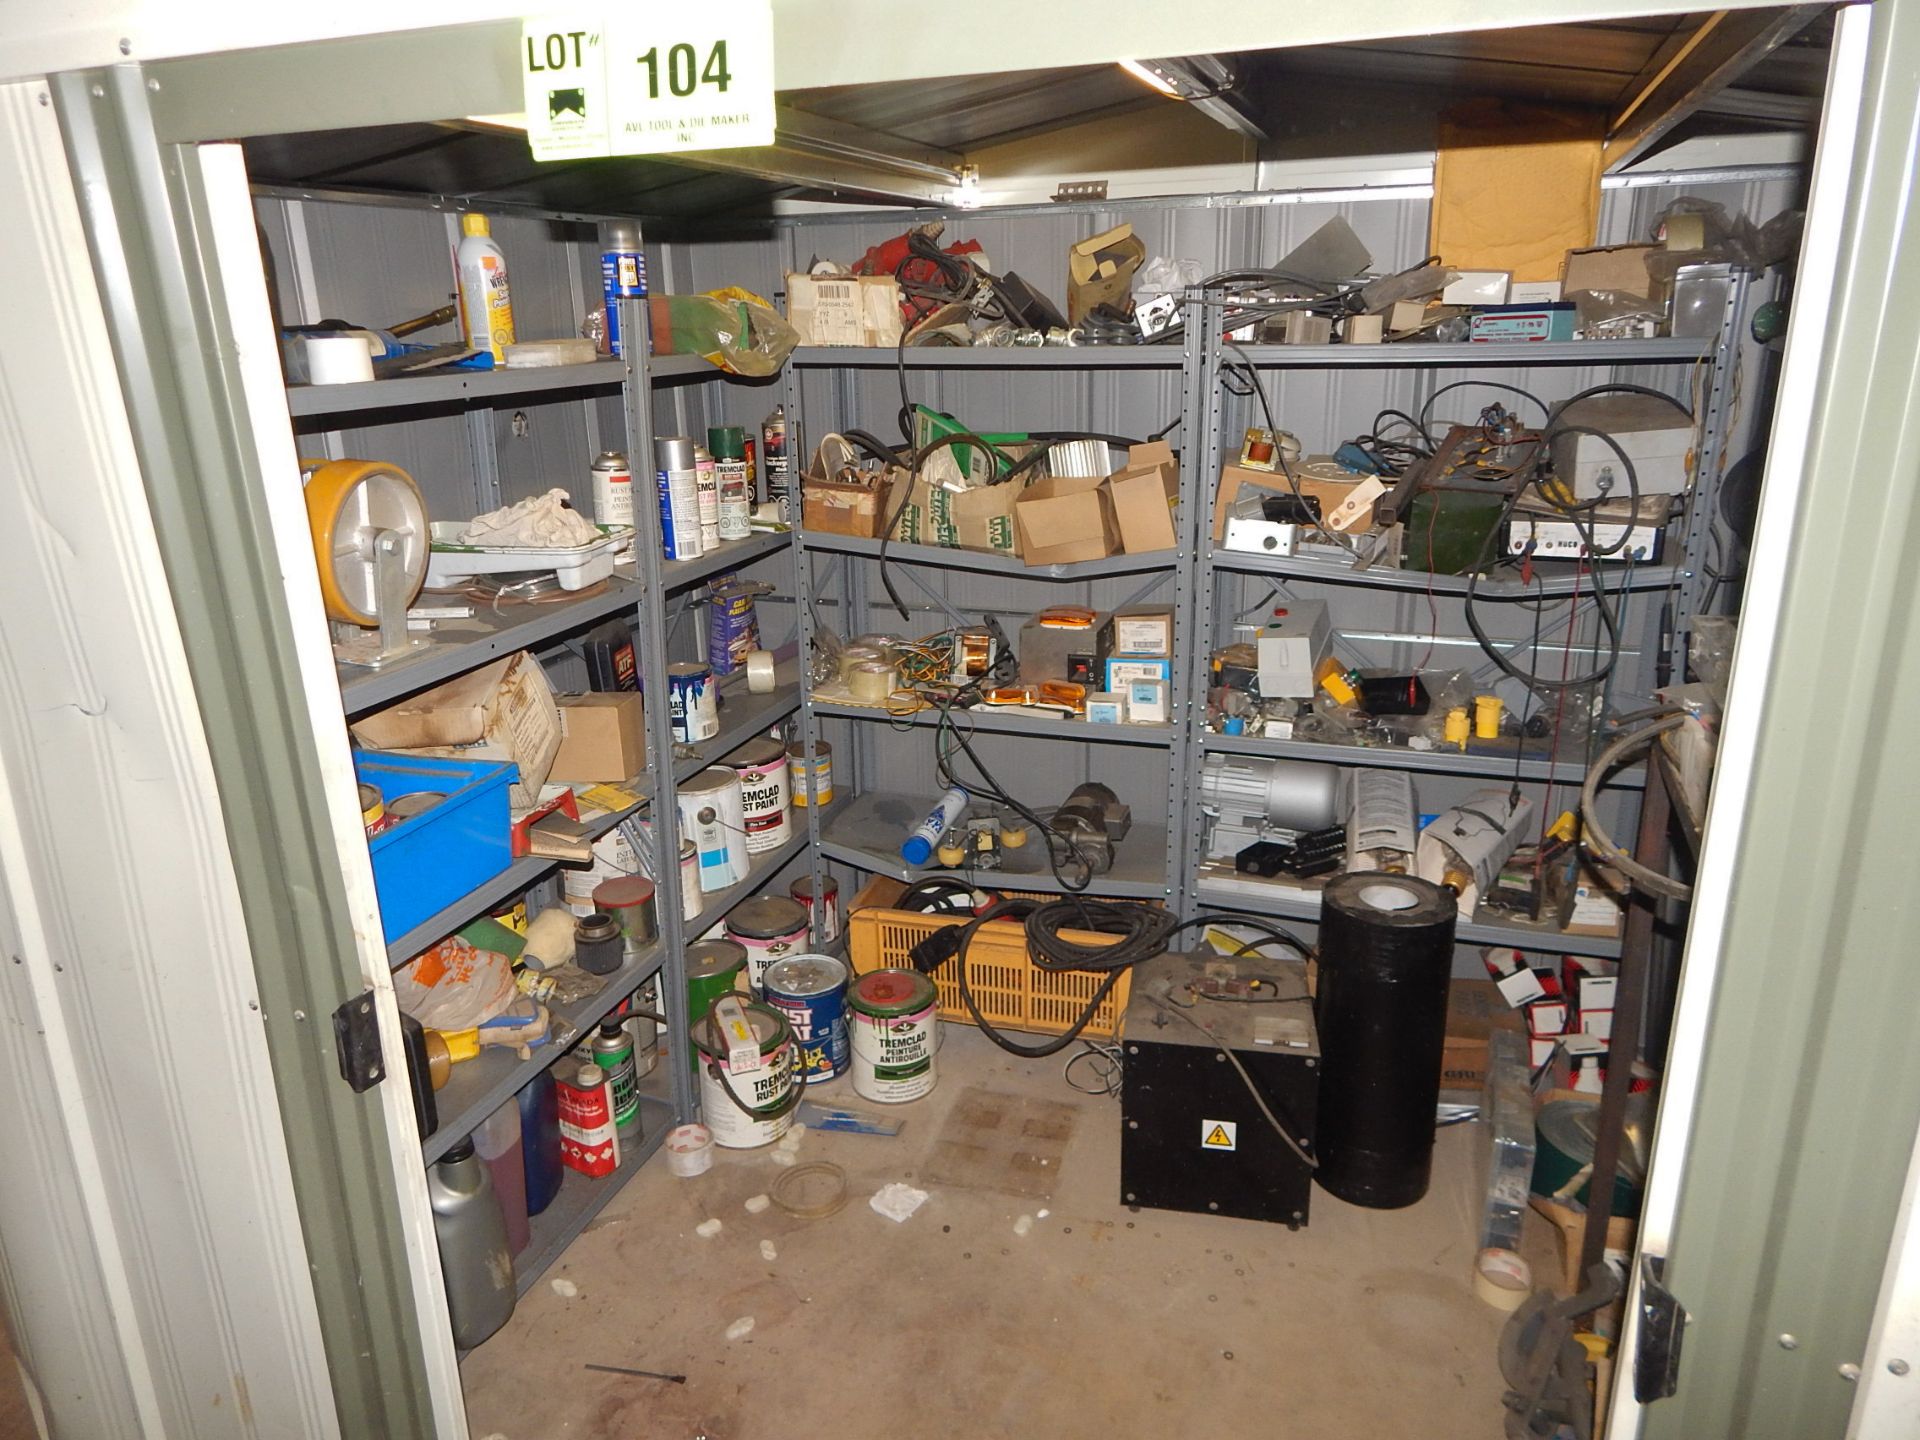 LOT/ STORAGE SHED WITH CONTENTS - Image 2 of 2